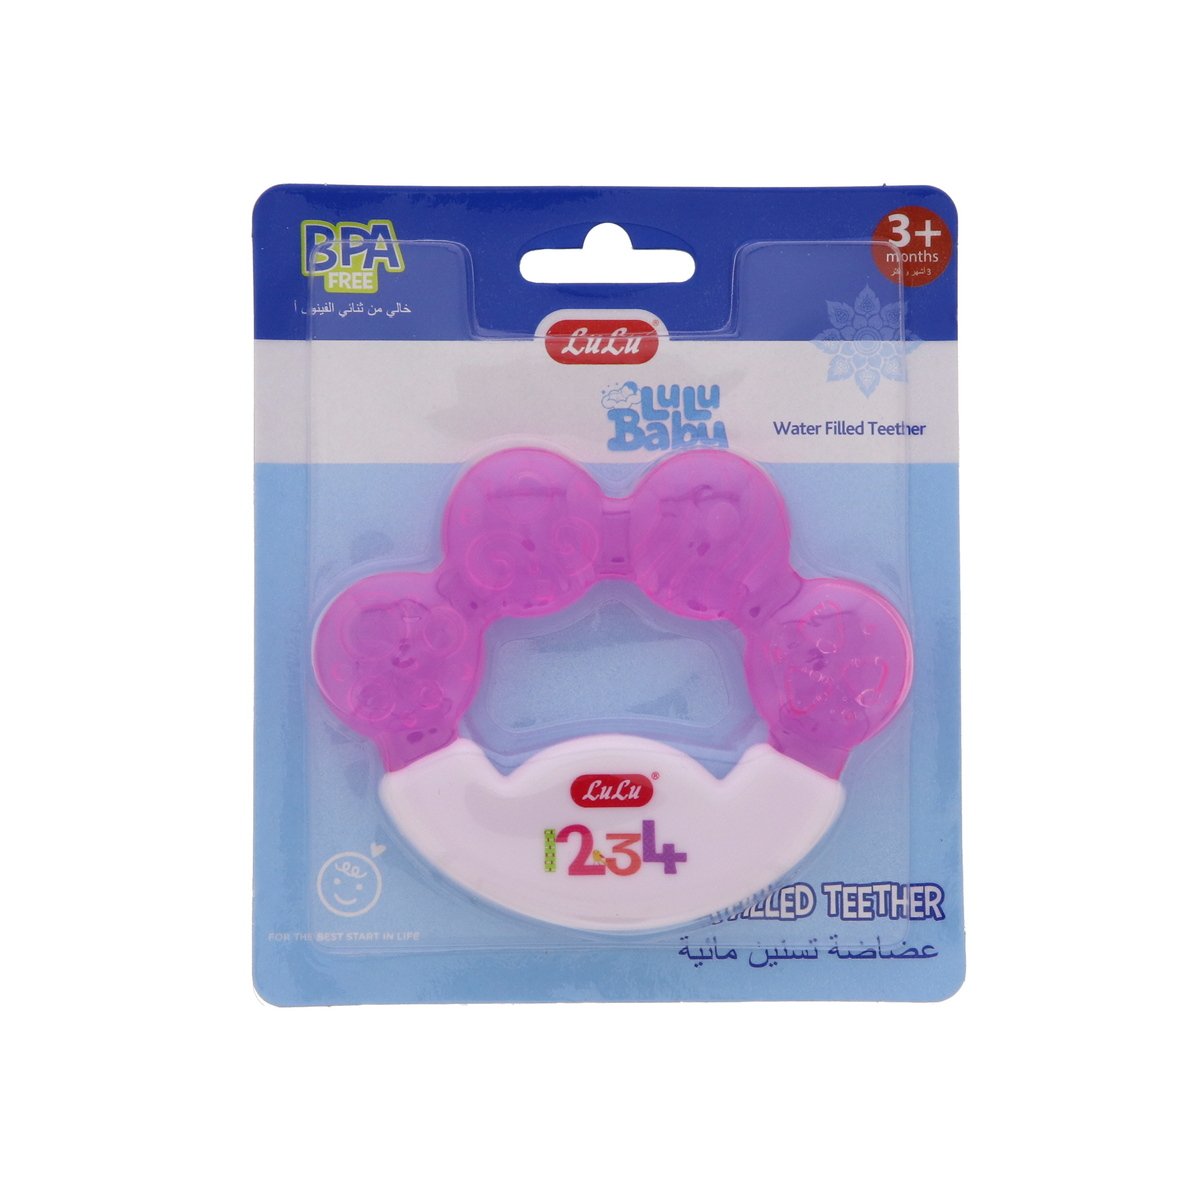 LuLu Baby Water Filled Teether 1 pc